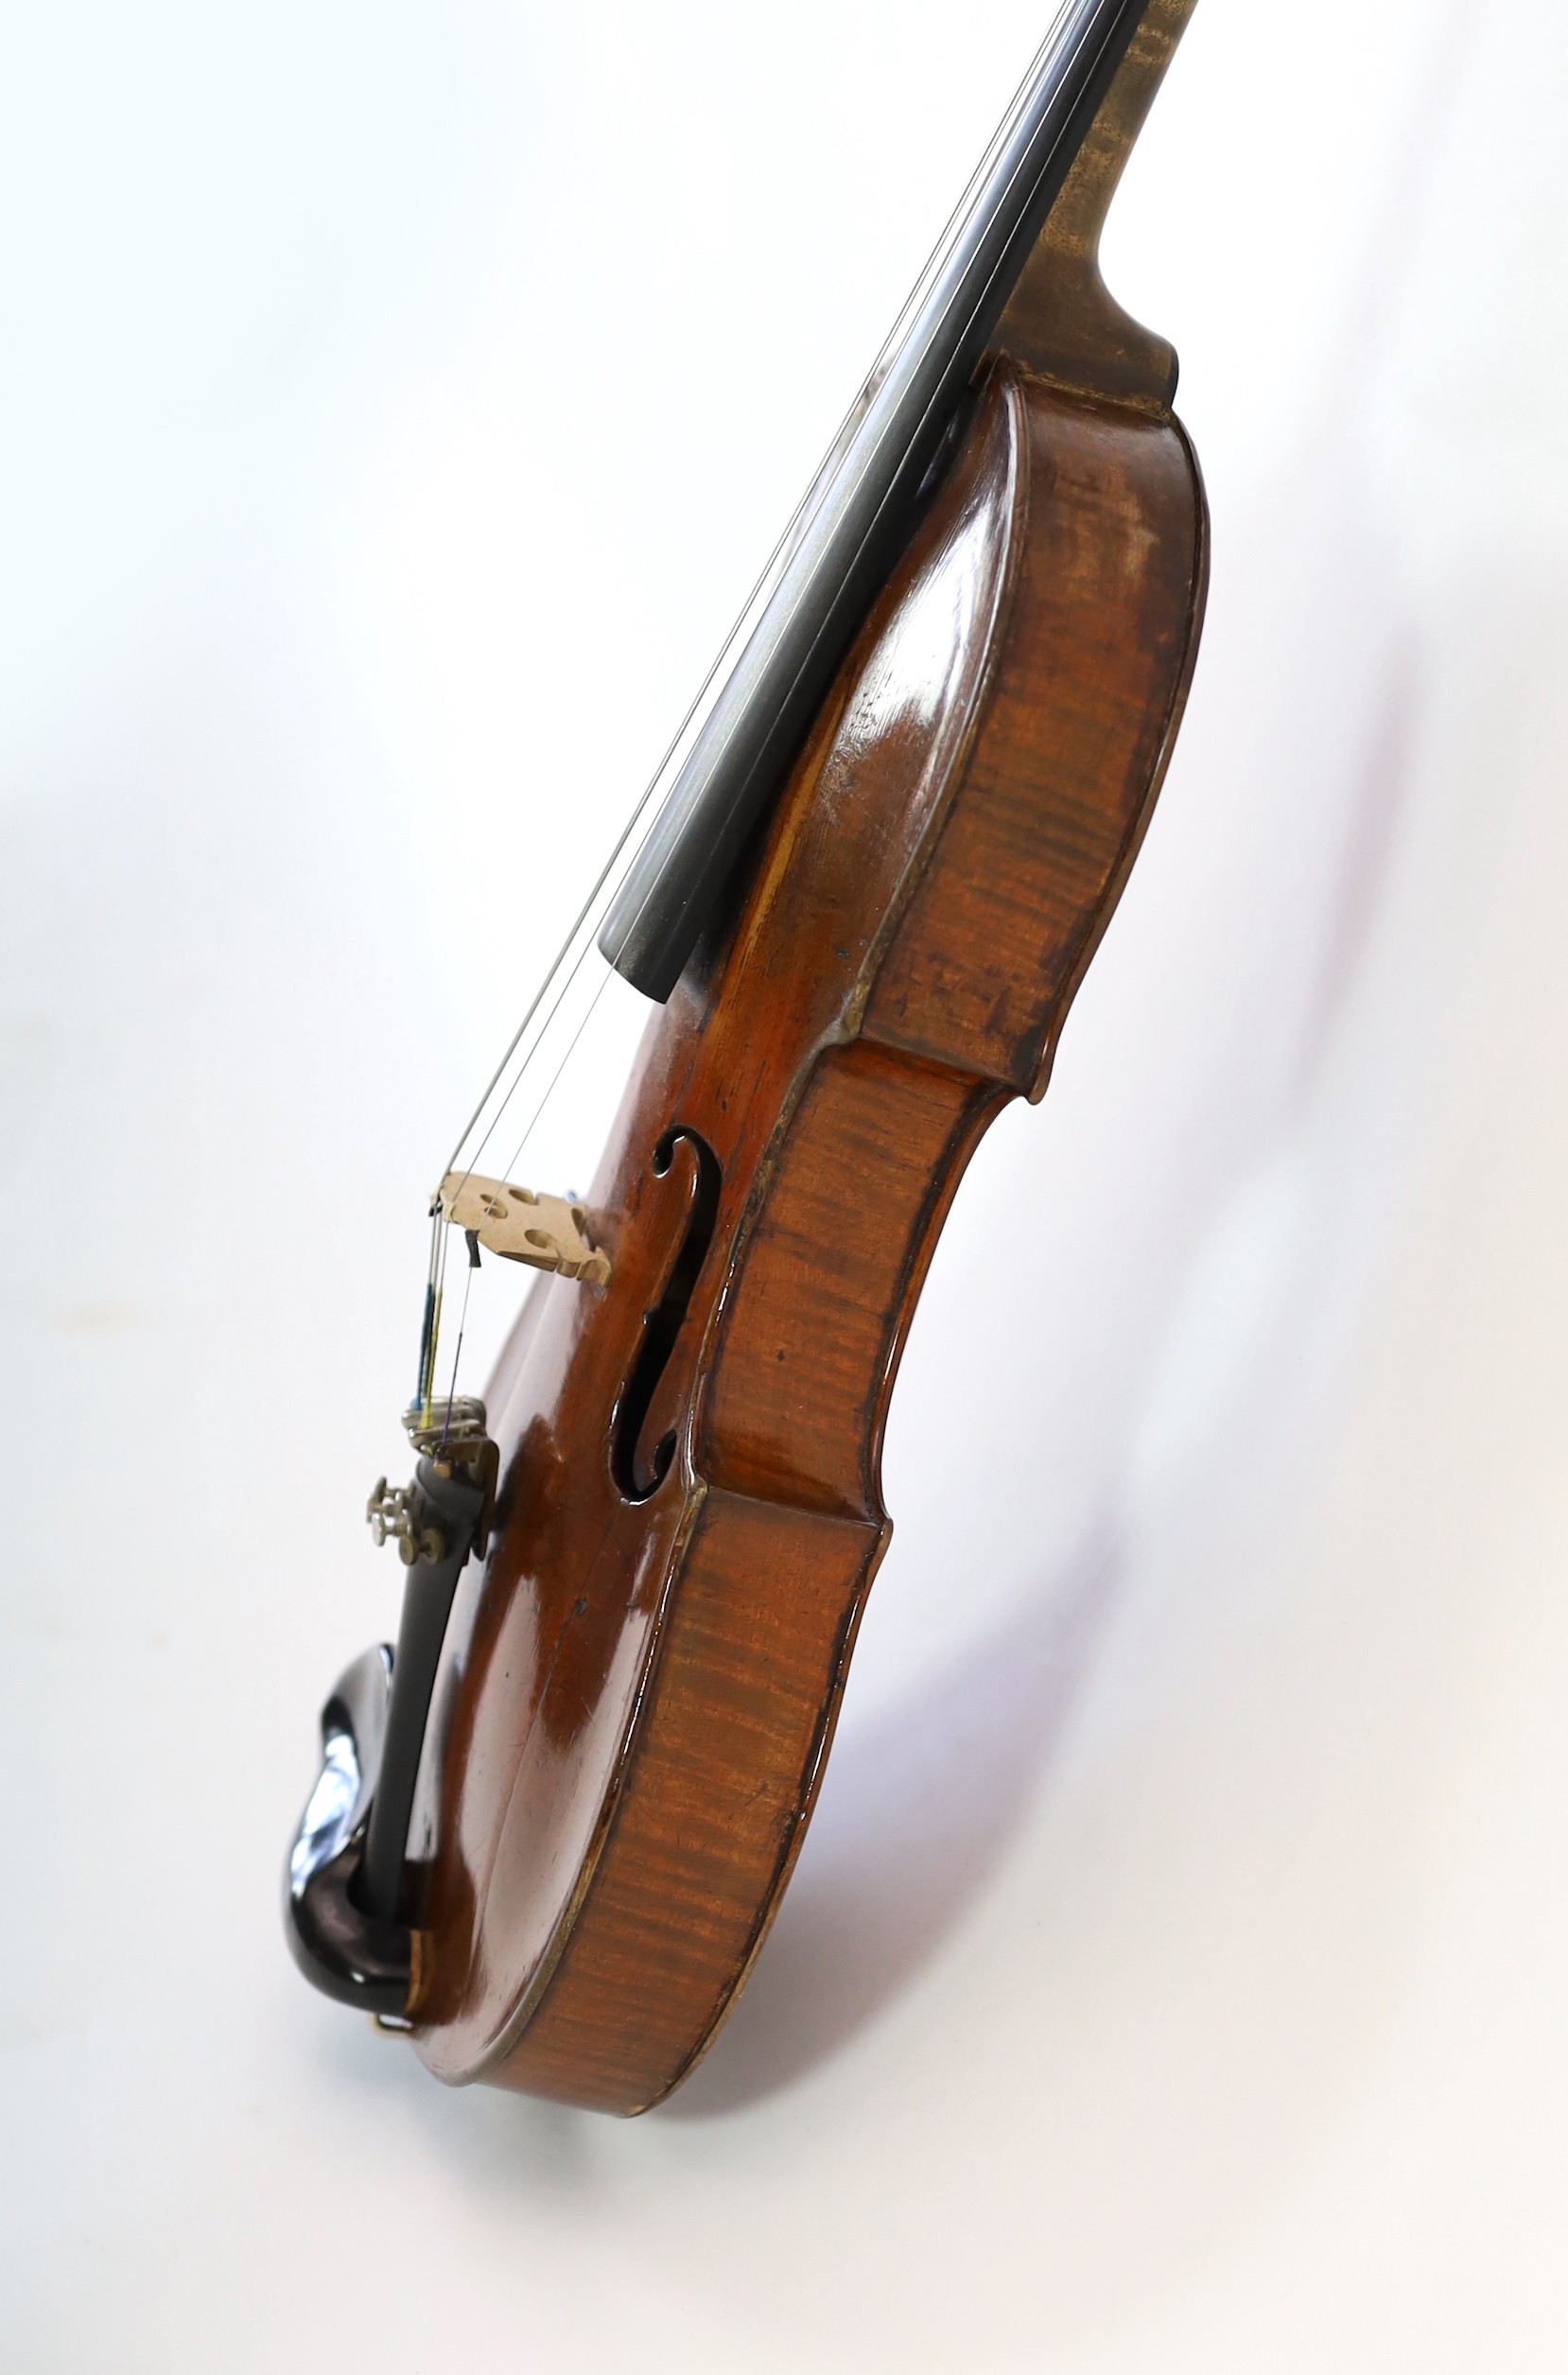 A 19th century violin attributed to Klotz school, unlabelled, the back and sides with medium curl, - Image 8 of 10